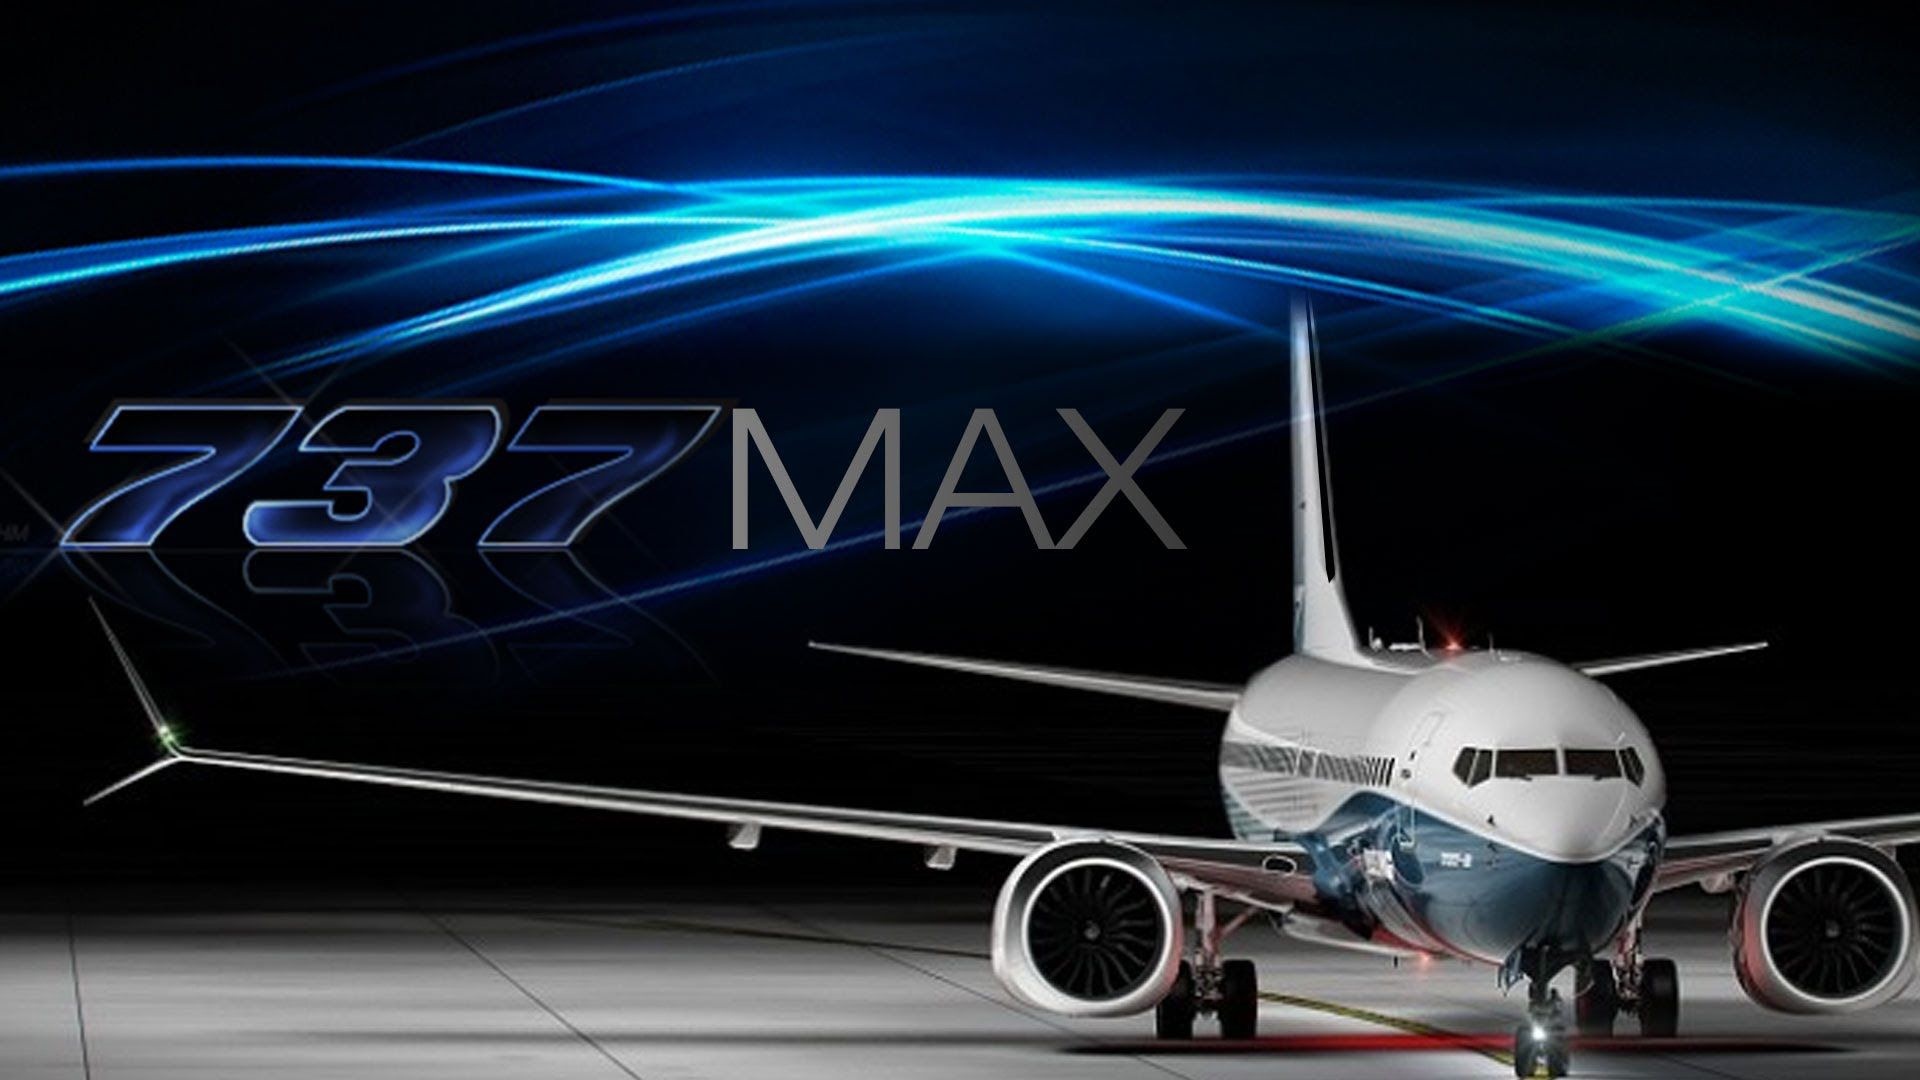 Boeing 737 MAX, Boeing wallpapers, Top free aircraft backgrounds, 1920x1080 Full HD Desktop